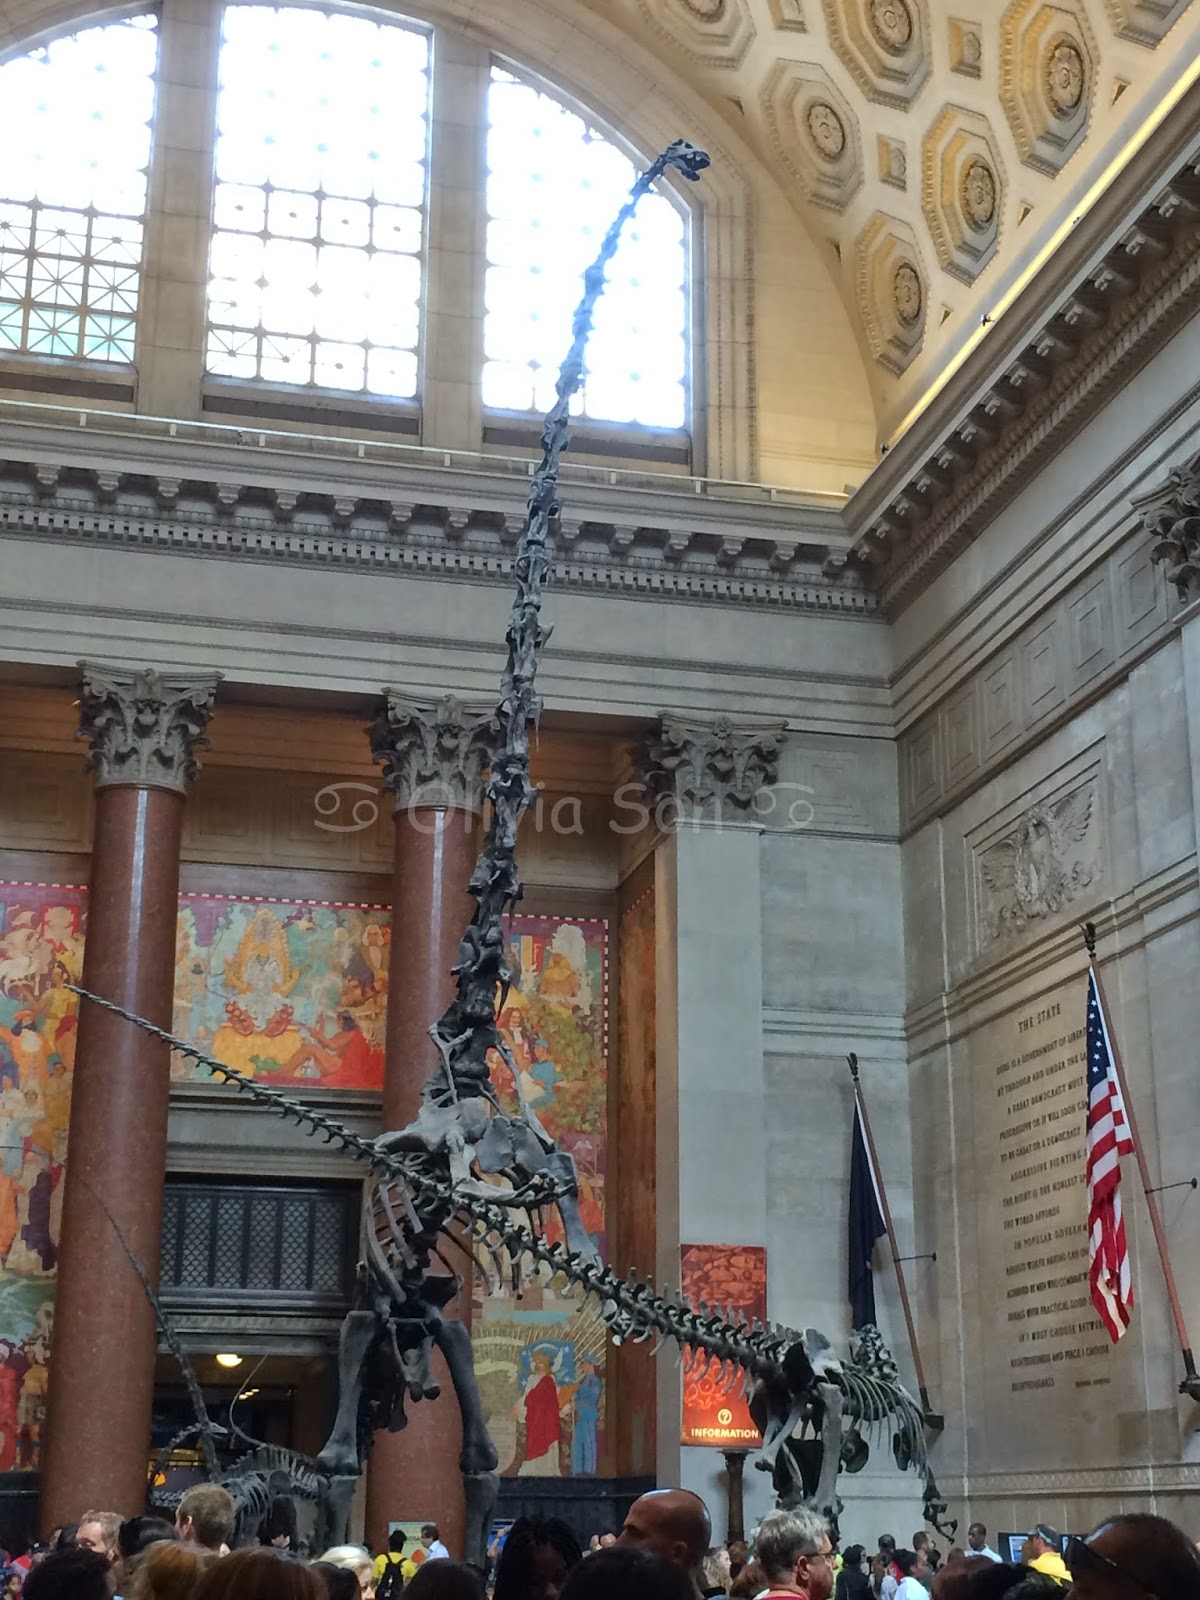 american museum of natural history, new york city, usa